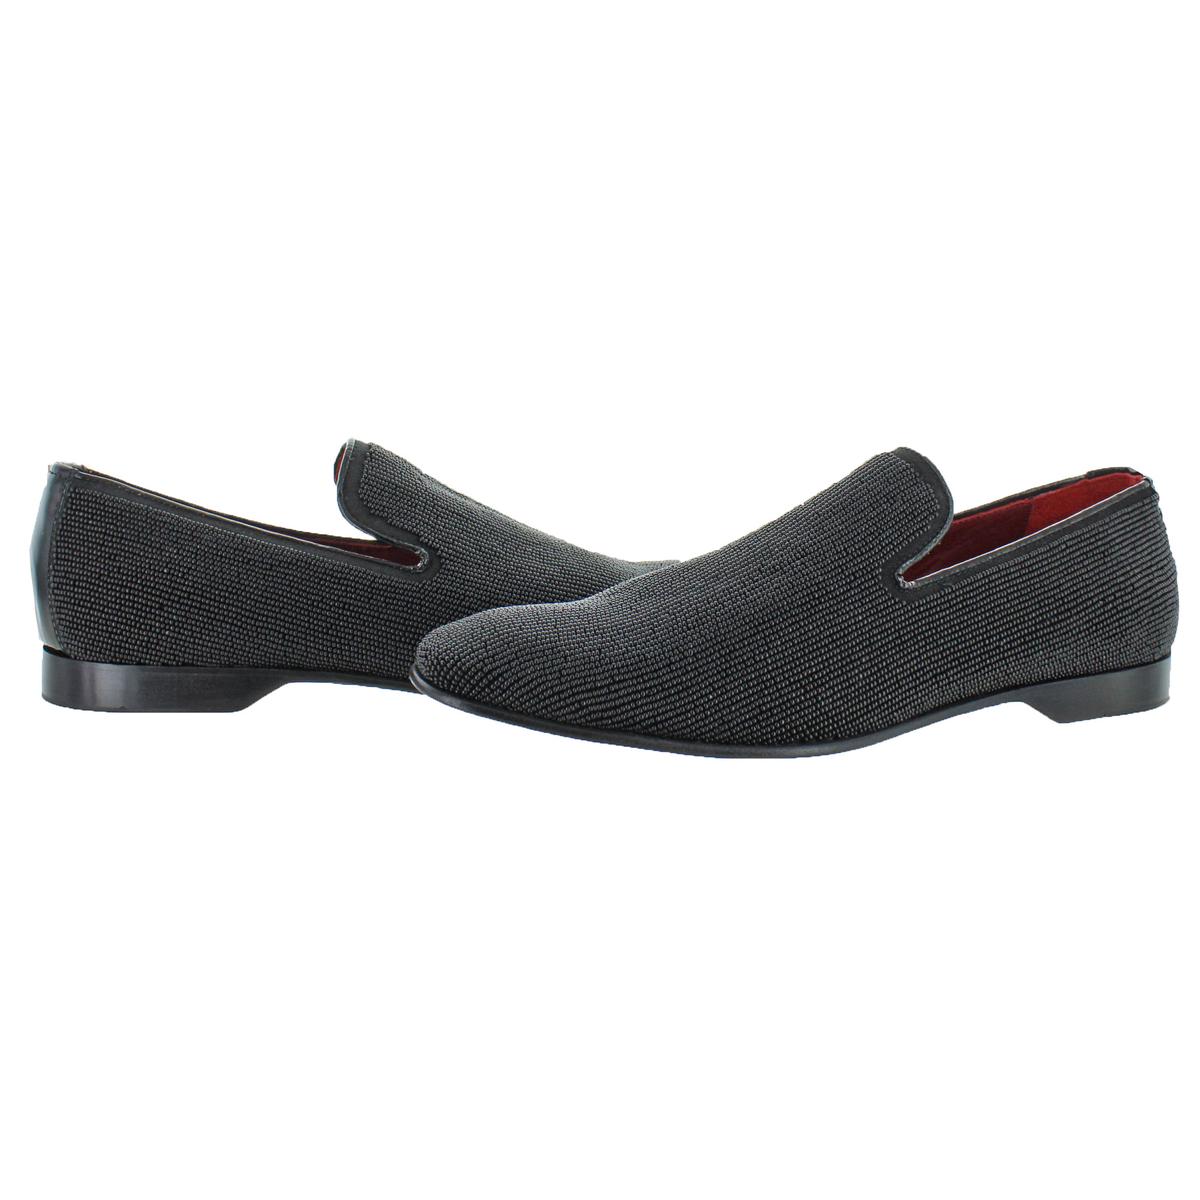 Pliner Mens Pascow Dress Smoking Loafers Shoes BHFO 0619 Donald J